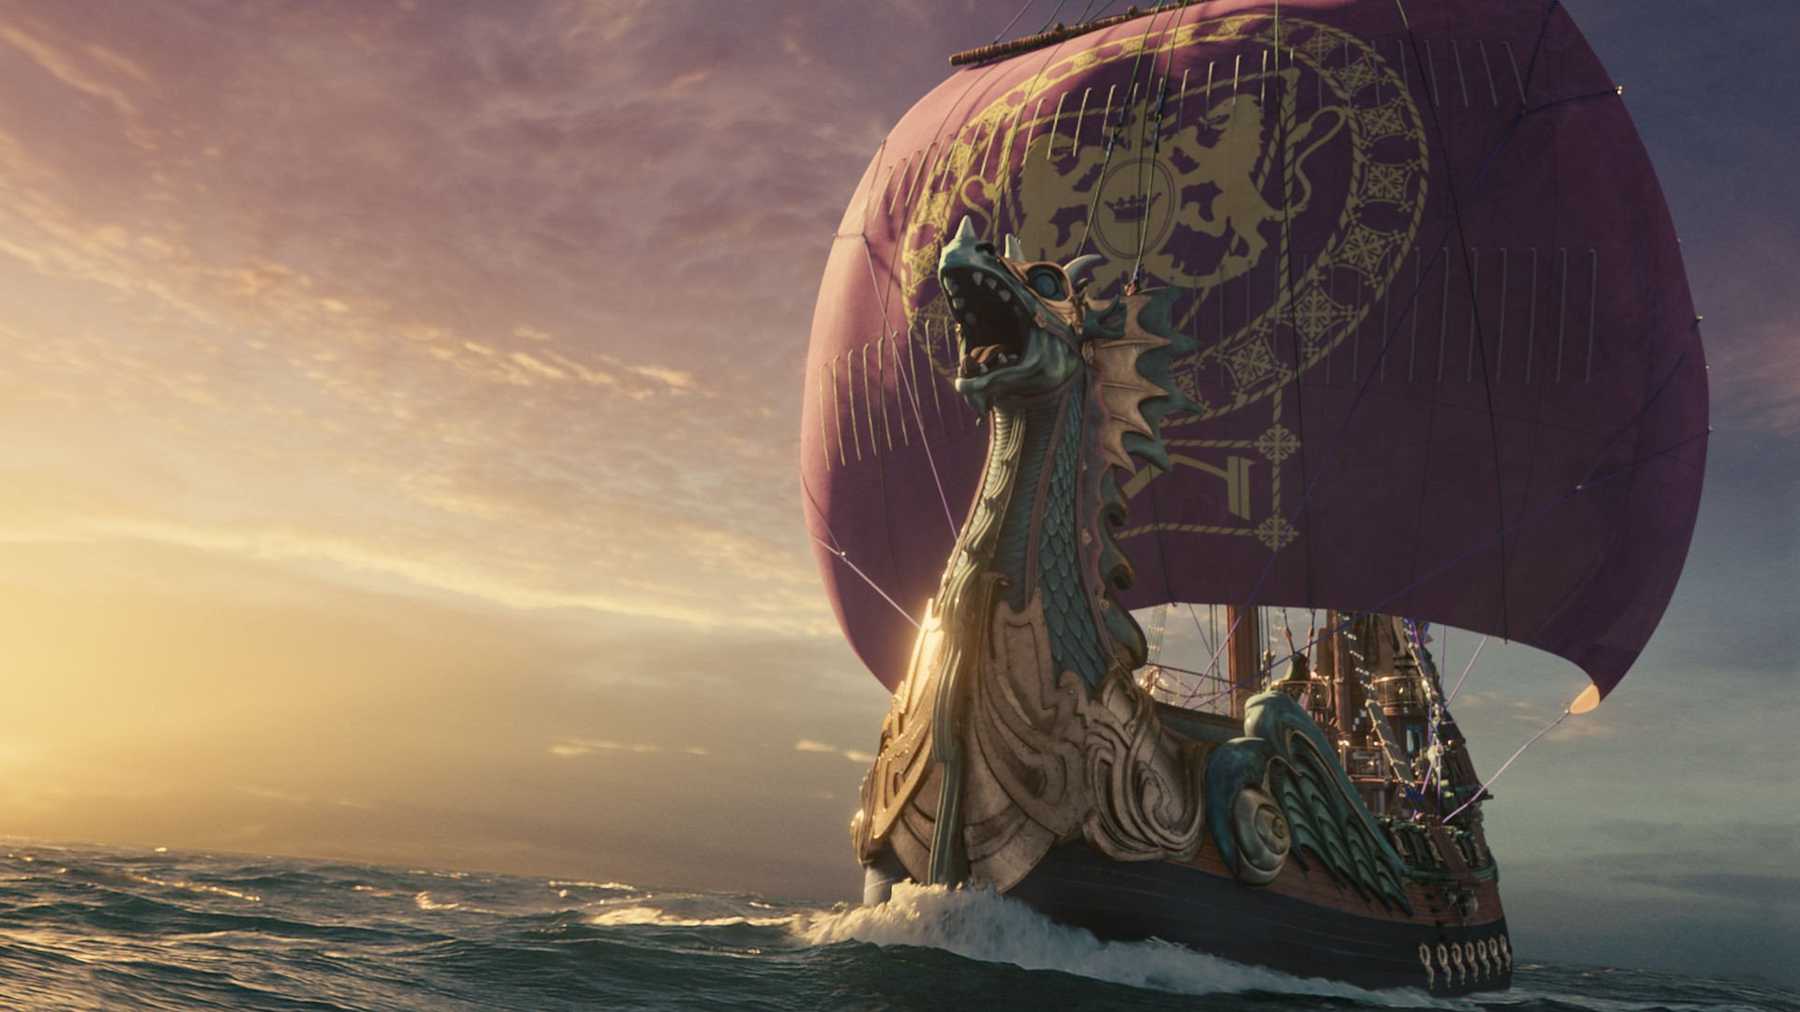 peter voyage of the dawn treader